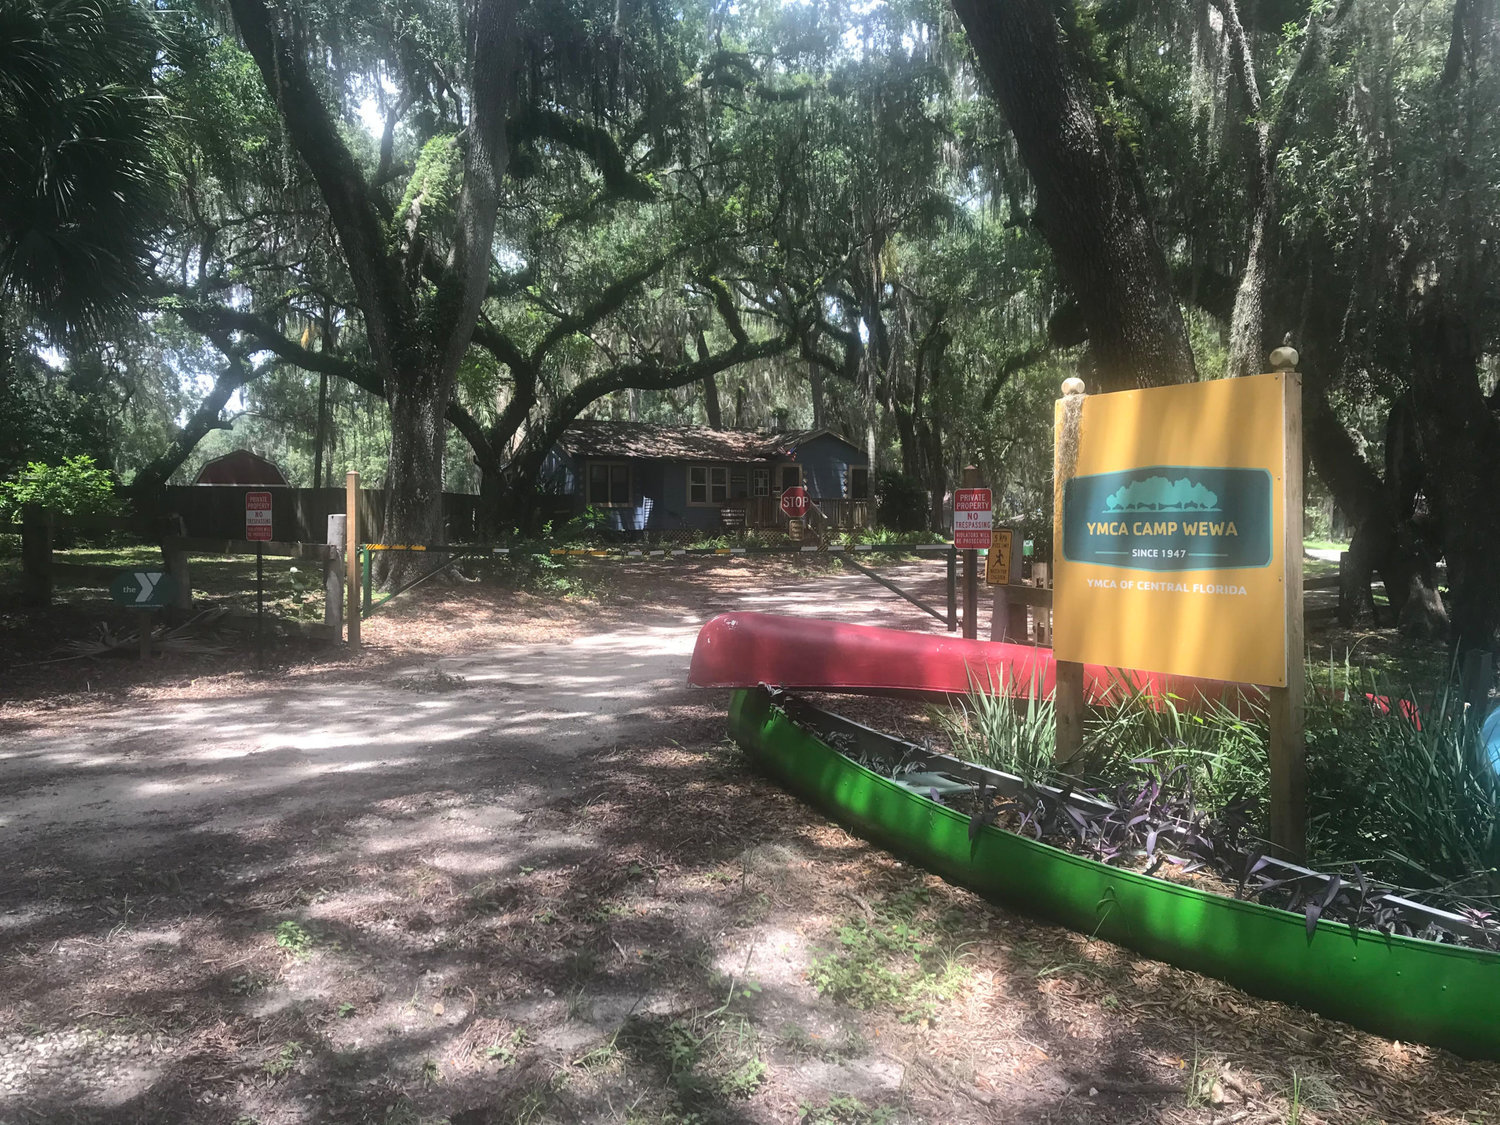 Camp Wewa received a state grant to transition from septic to sewer.